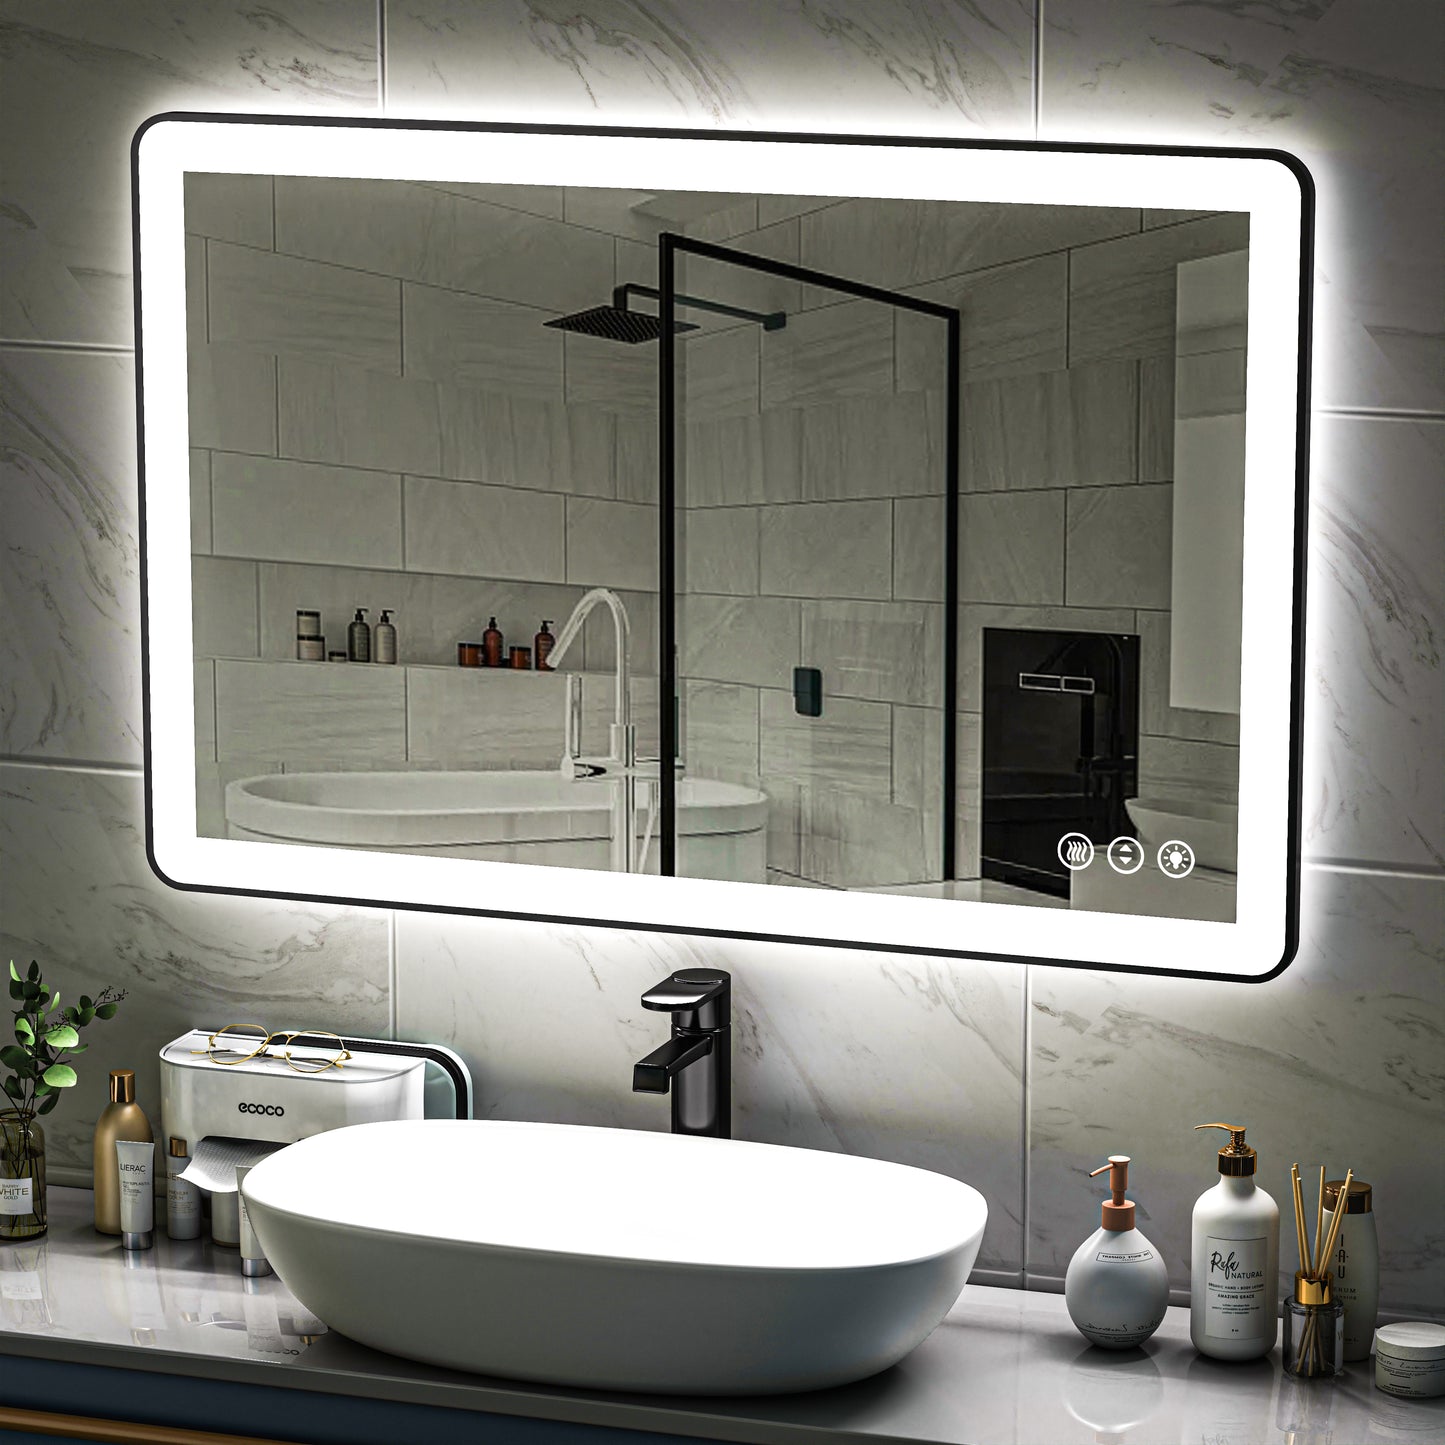 Waterpar® 48 in. W x 32 in. H Rectangular Framed Anti-Fog LED Wall Bathroom Vanity Mirror in Black with Backlit and Front Light